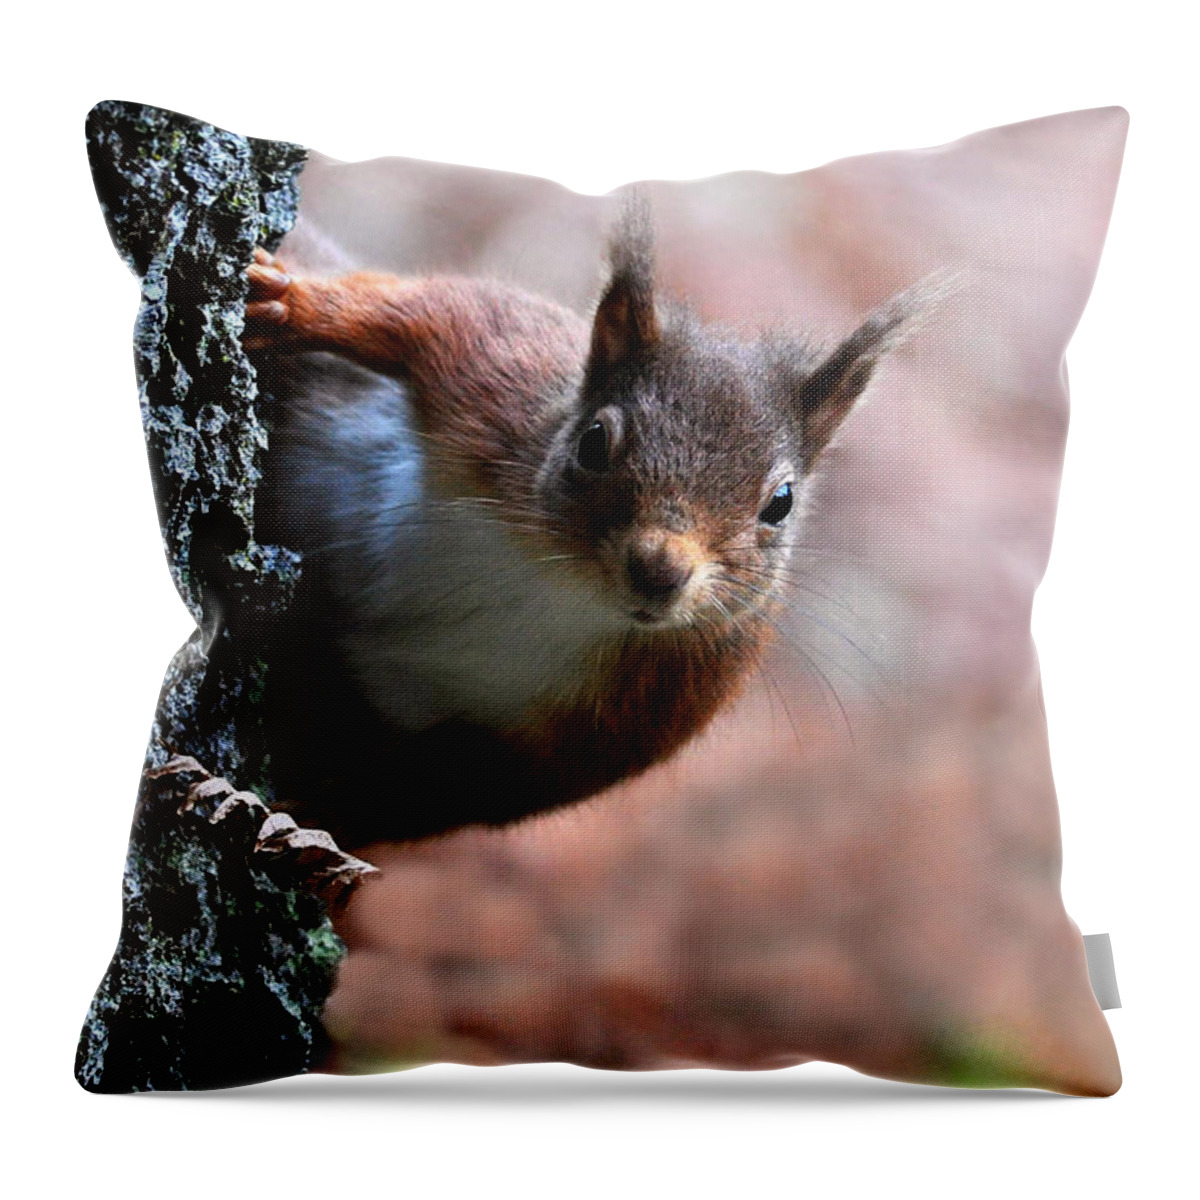  Red Squirrel Throw Pillow featuring the photograph Red Squirrel by Macrae Images